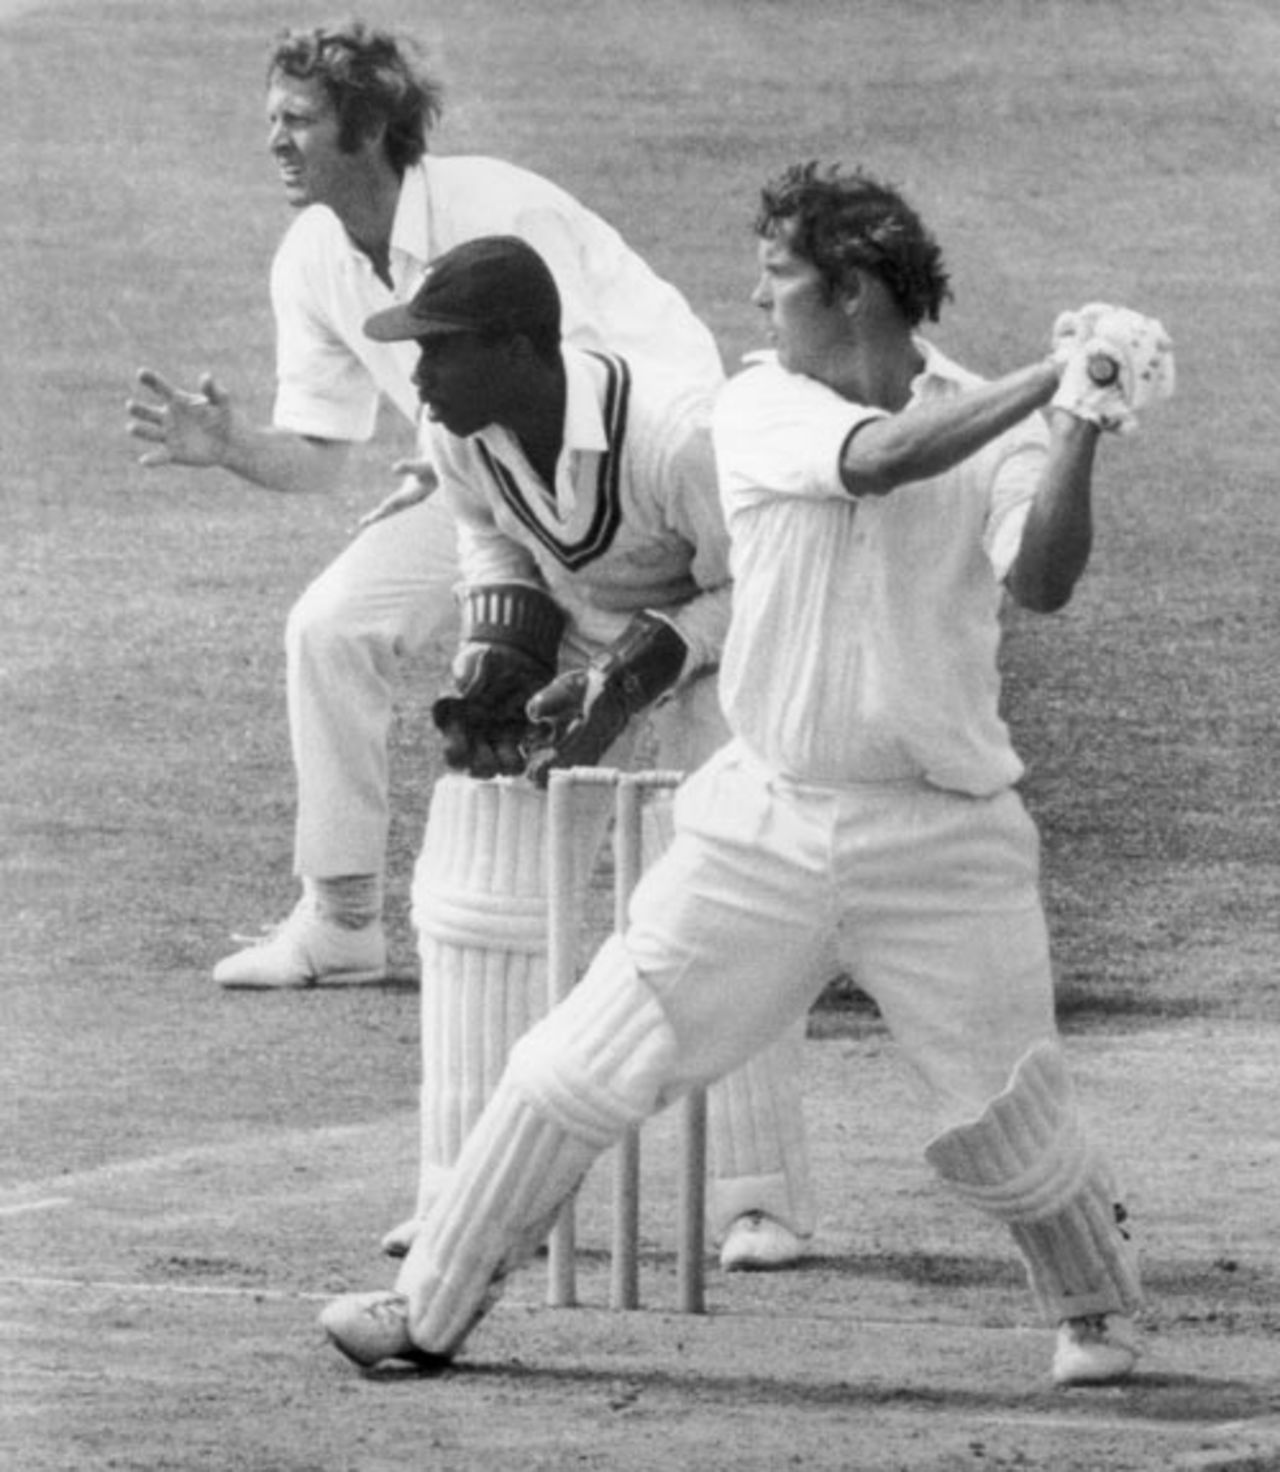 John Hampshire cuts the ball, The Oval, July 26, 1975